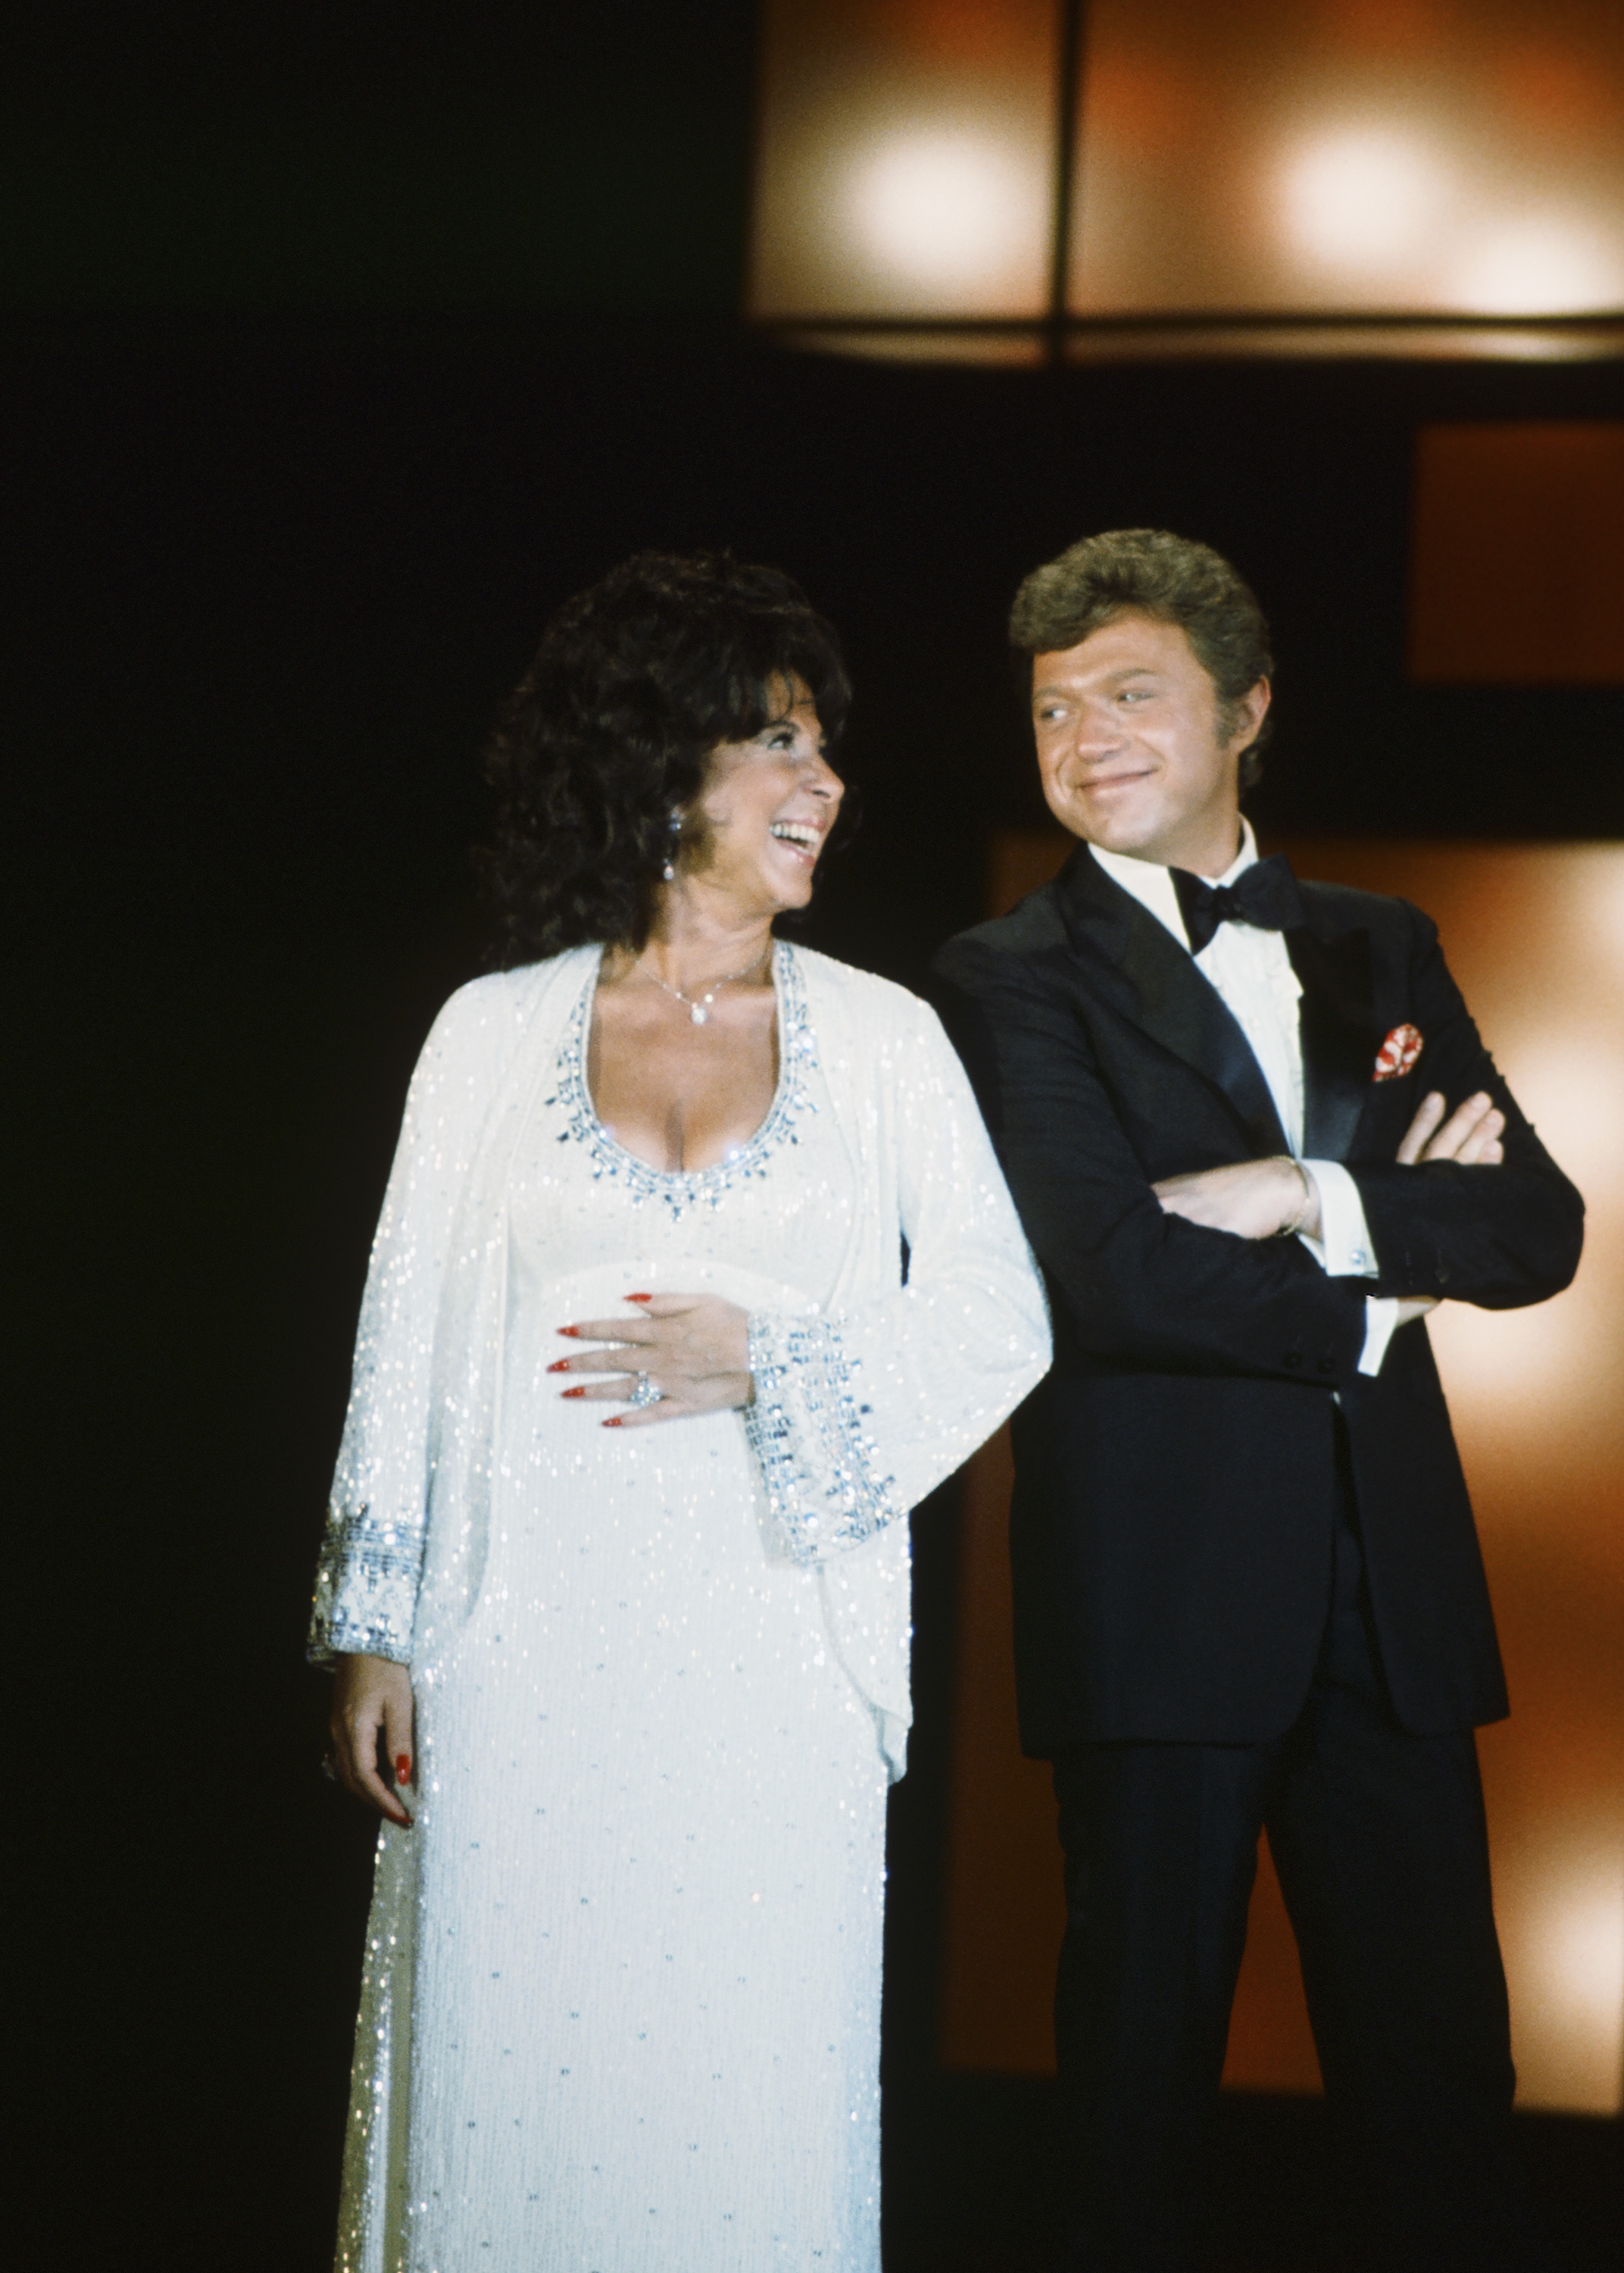 Eydie Gorme and Steve Lawrence perform at Caesar's Palace in Las Vegas, Nevada, circa 1973. | Source: Getty Images